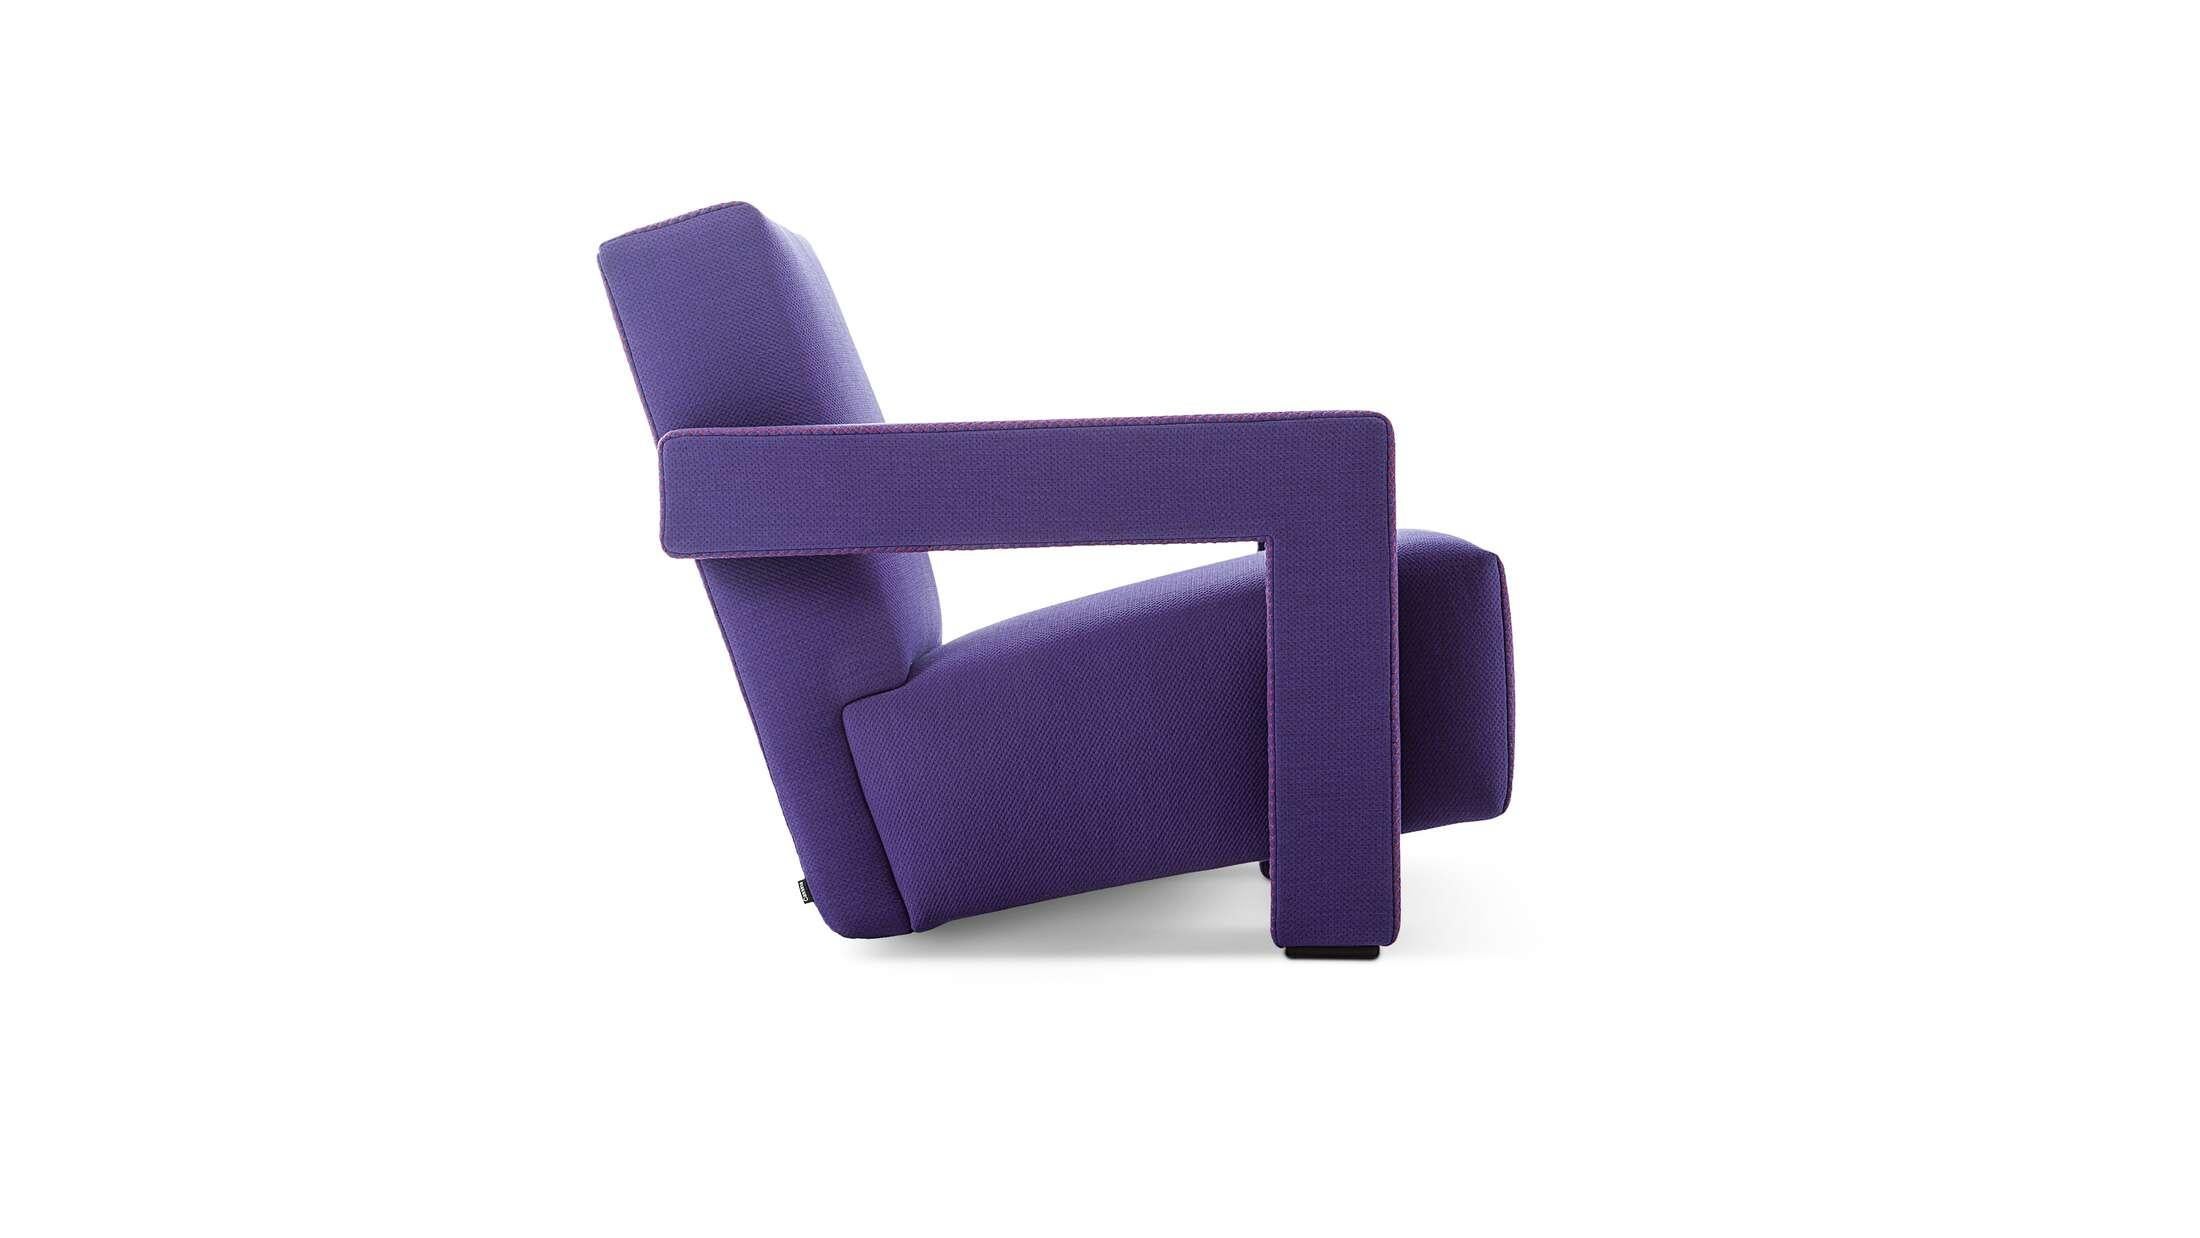 Armchair designed by Gerrit Thomas Rietveld in 1935. Relaunched in 2015. Manufactured by Cassina in Italy. Available in many different colors. 